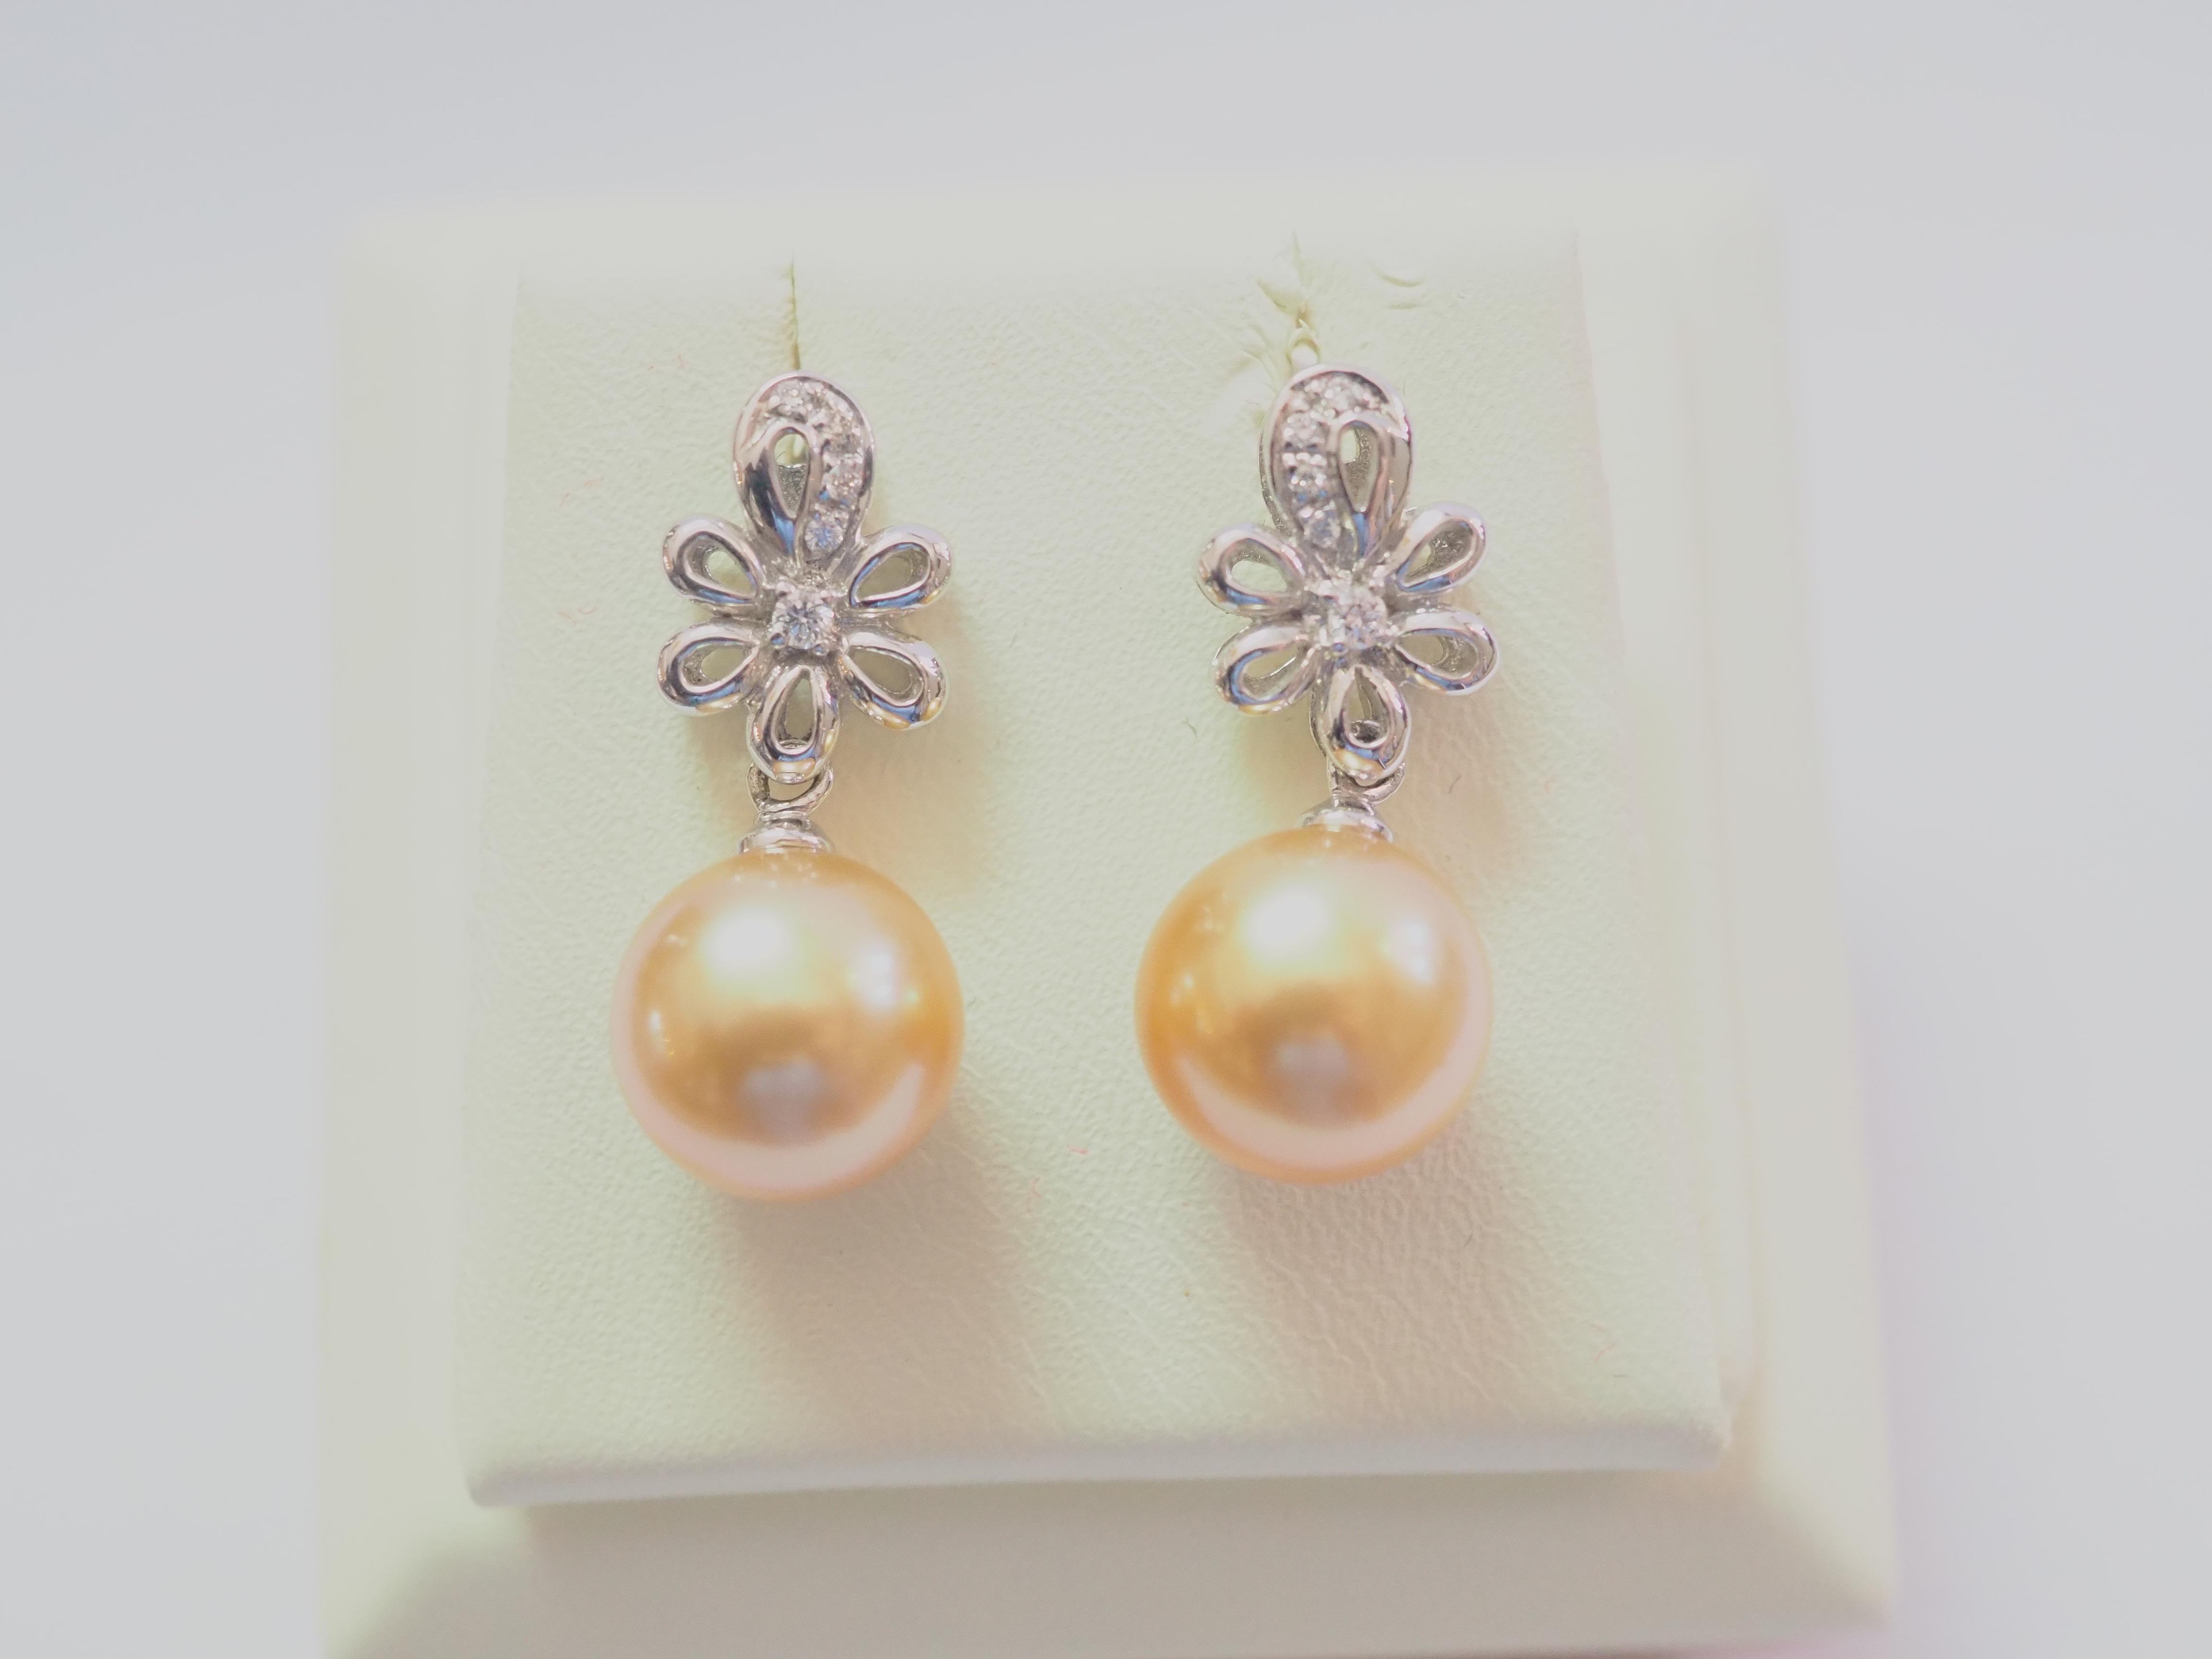 This wonderful pearl earring piece is magnificent with delicate flower design. The piece is adorned with 2 gorgeous South Sea golden pearls of diameter 9 mm. They are perfectly round and almost flawless which is rare and is an extremely difficult